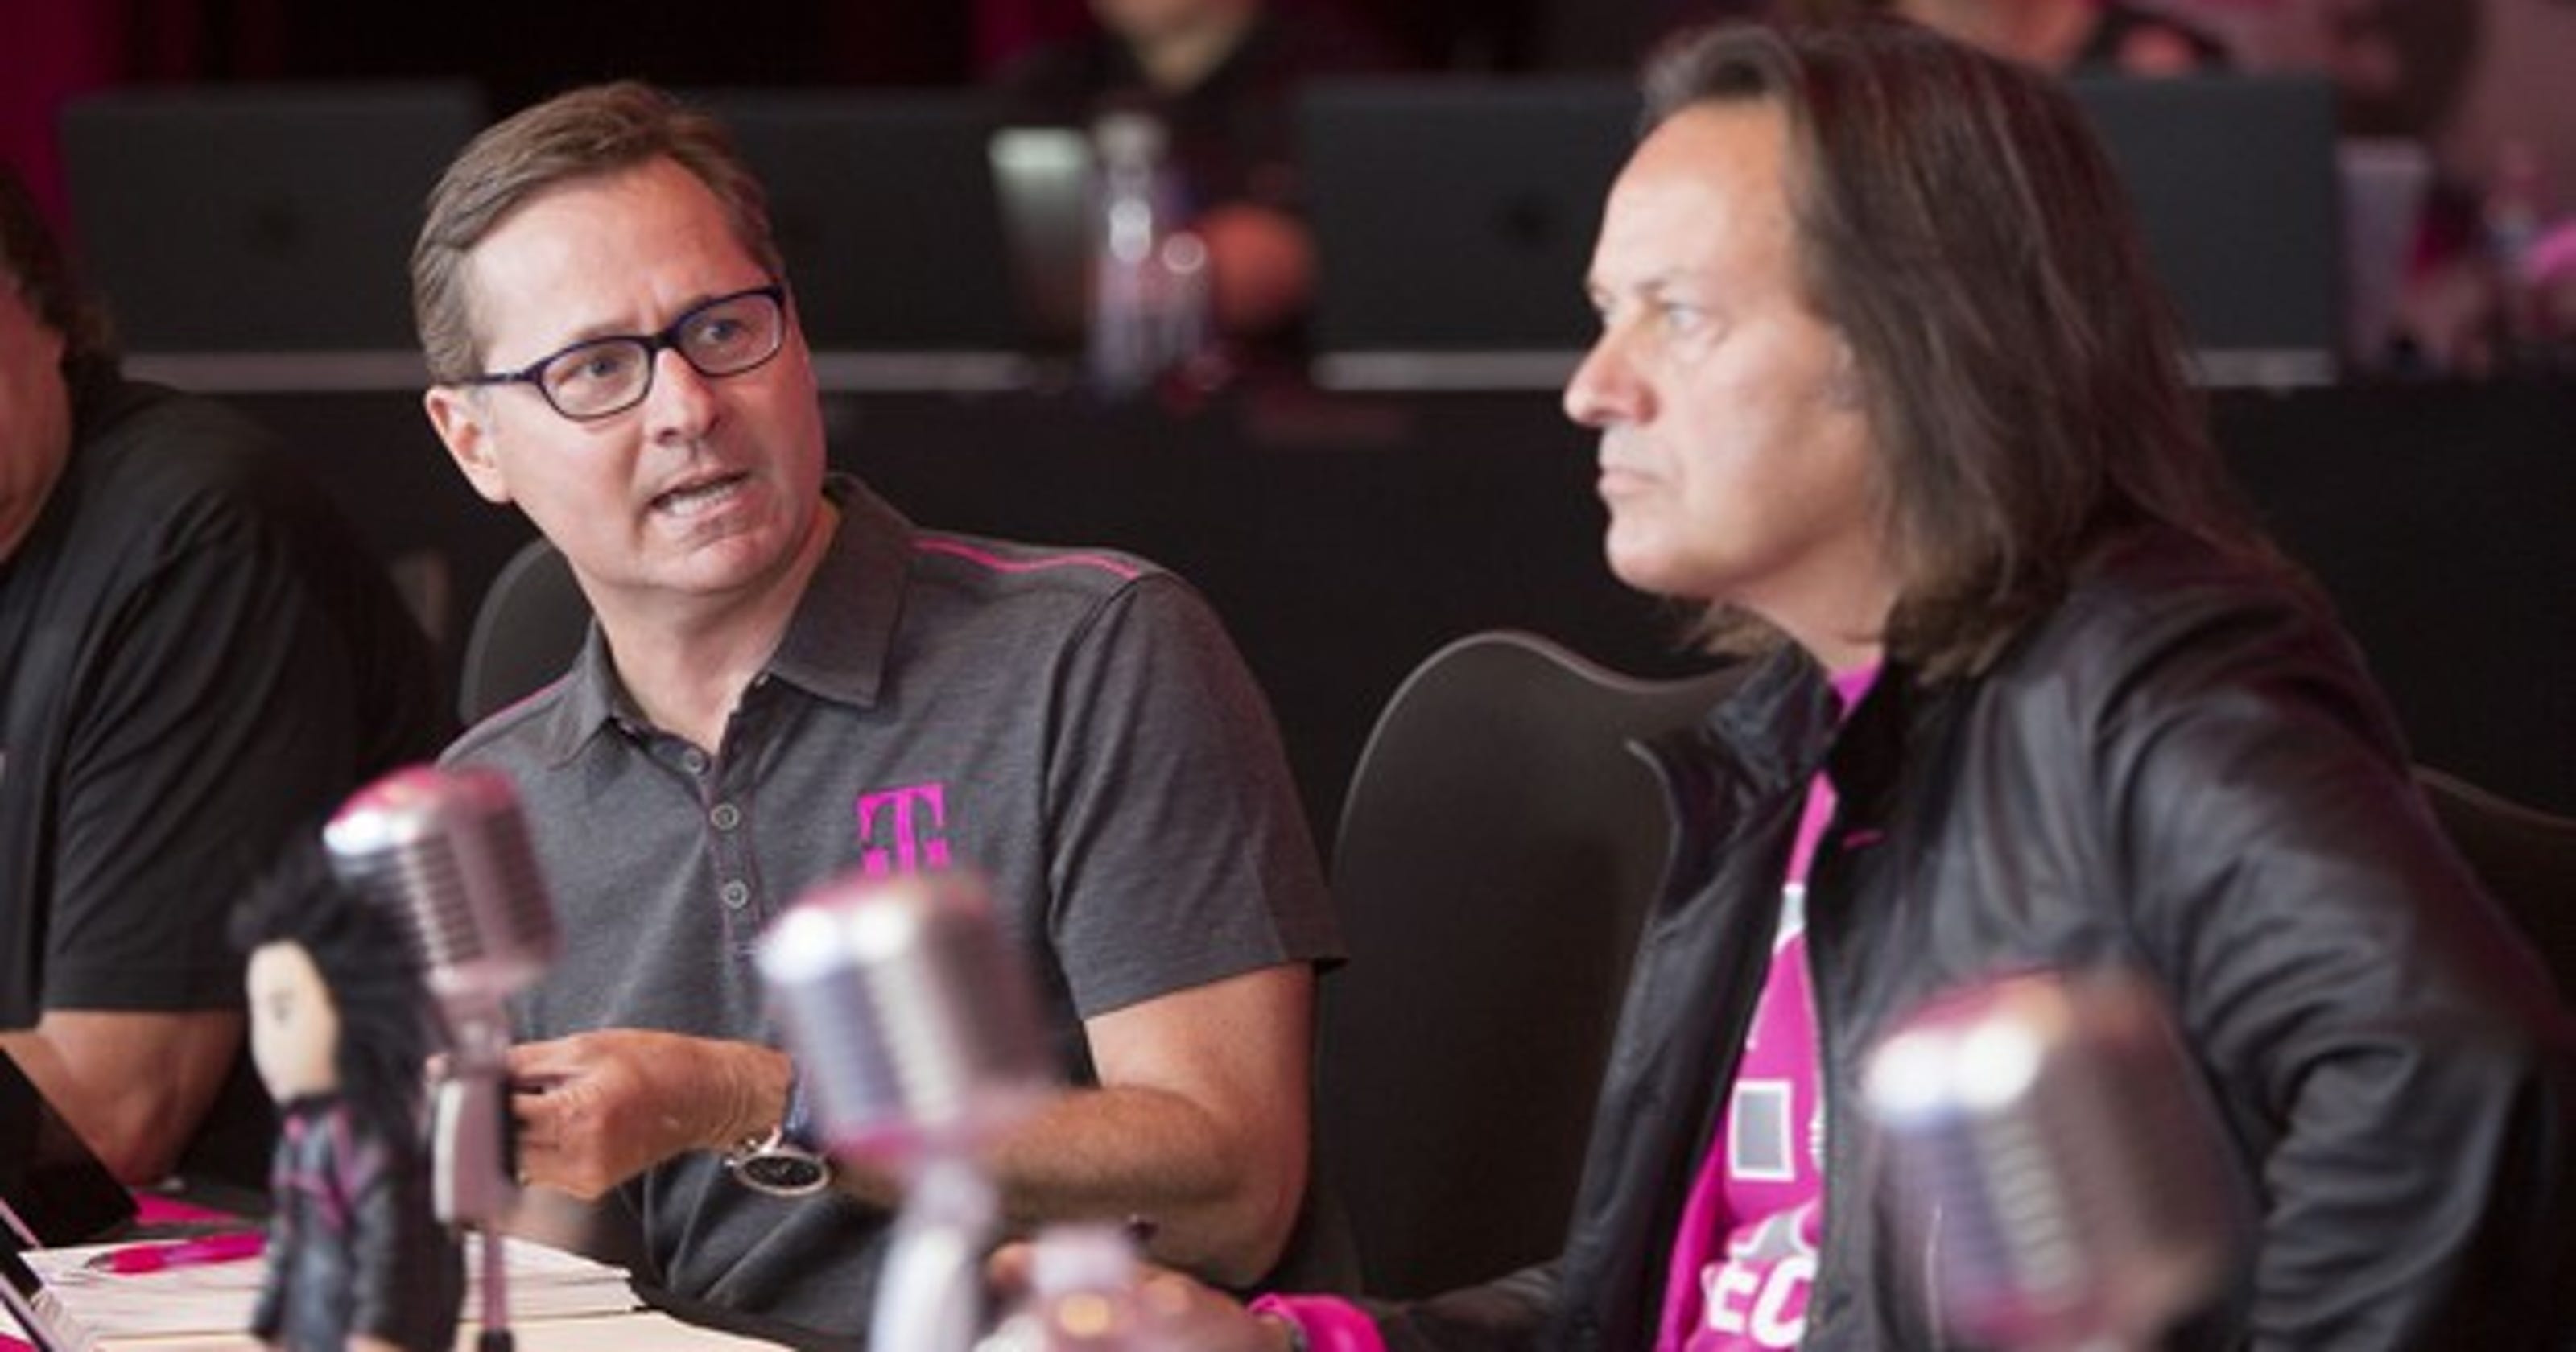 T-Mobile aims to take on cable companies in latest Sprint merger pitch3200 x 1680